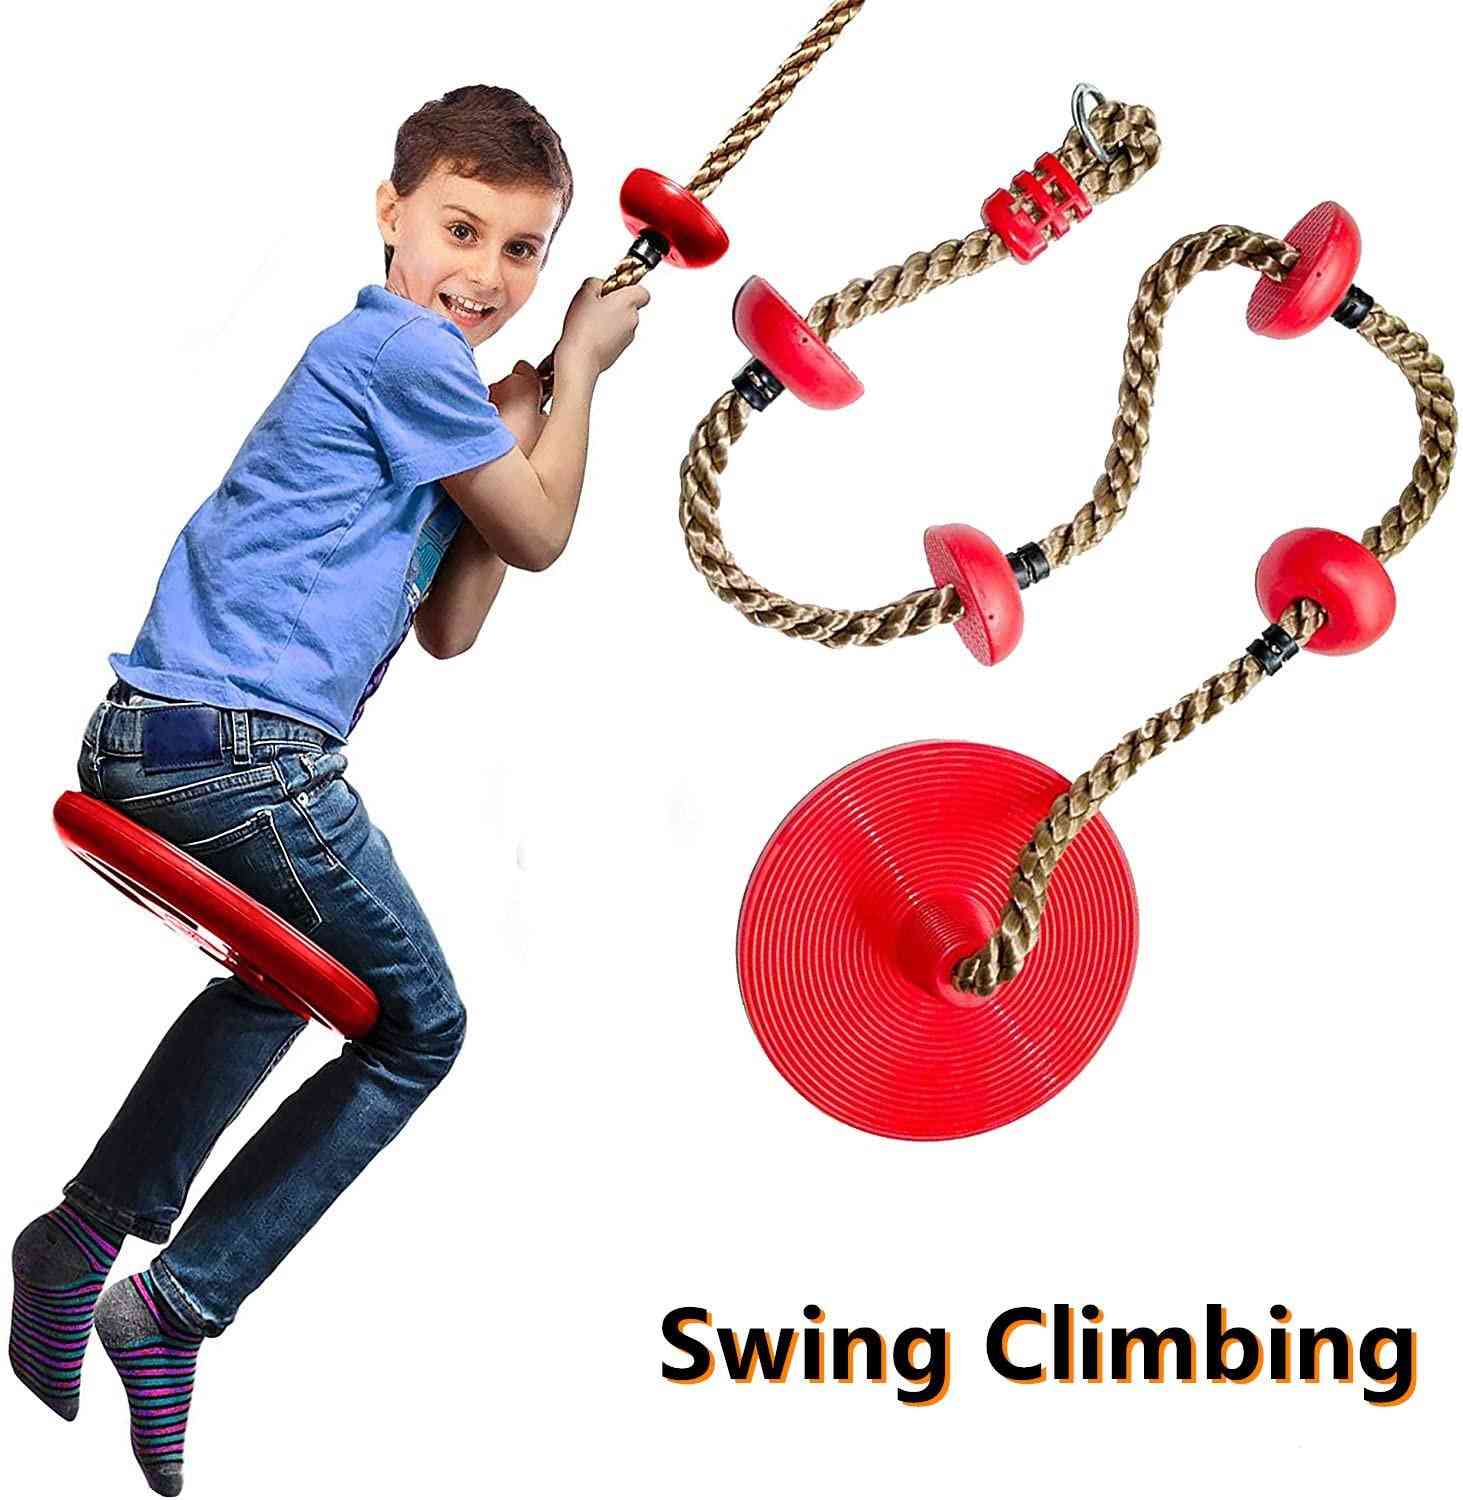 Exciting Tree Swing Climbing Rope With Platforms / Strap For Tree